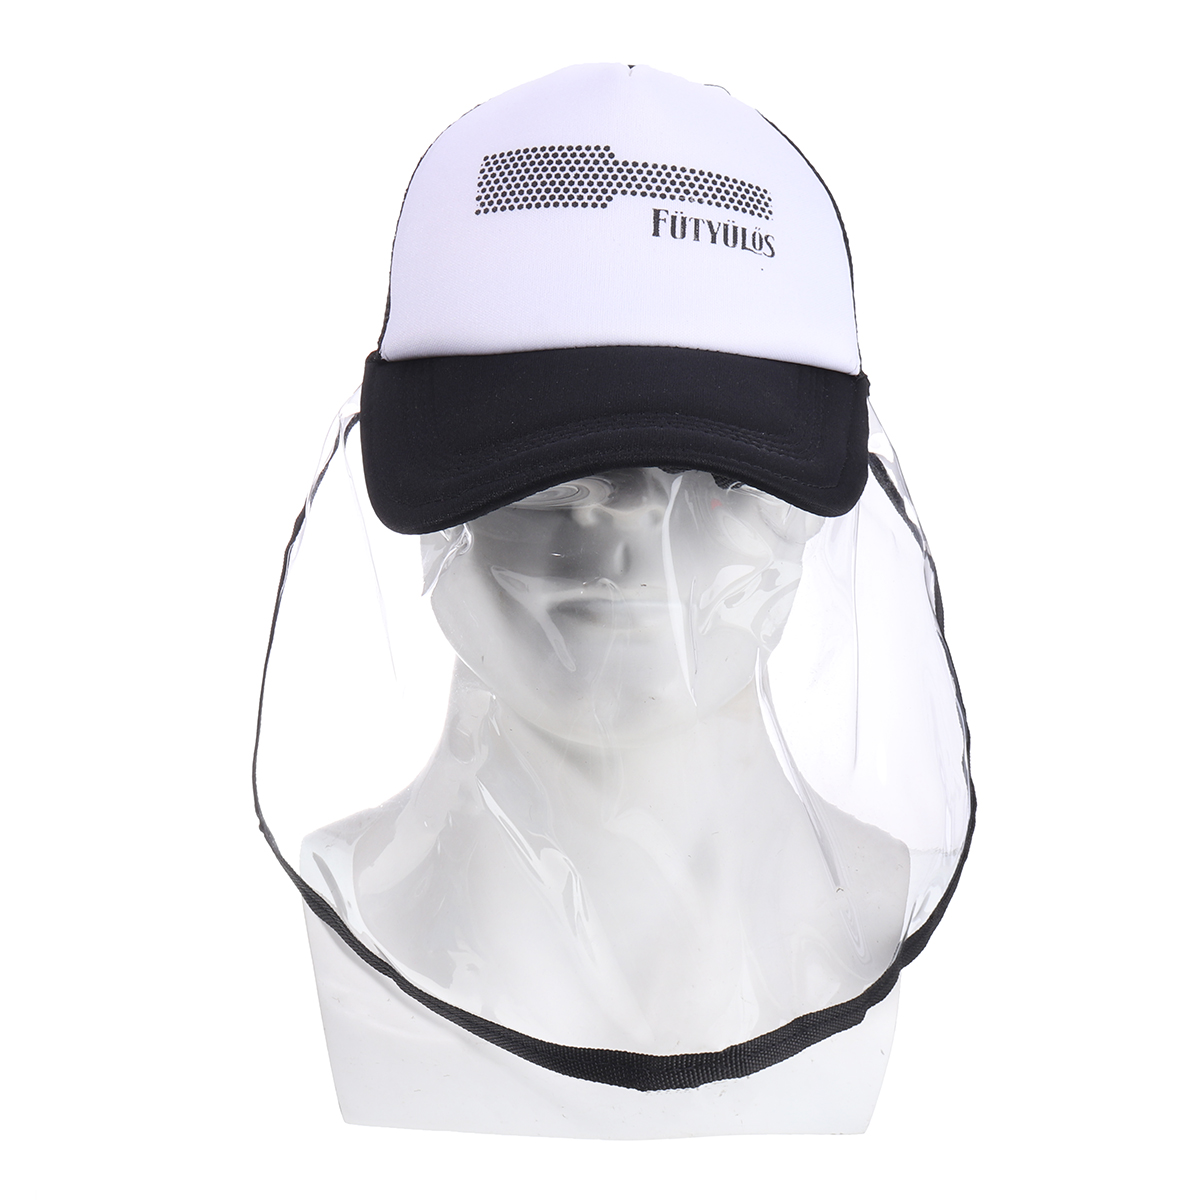 Anti-spitting-Protective-Hat-Dustproof-Cover-Peaked-Cap-Fisherman-Sun-protection-1659915-7